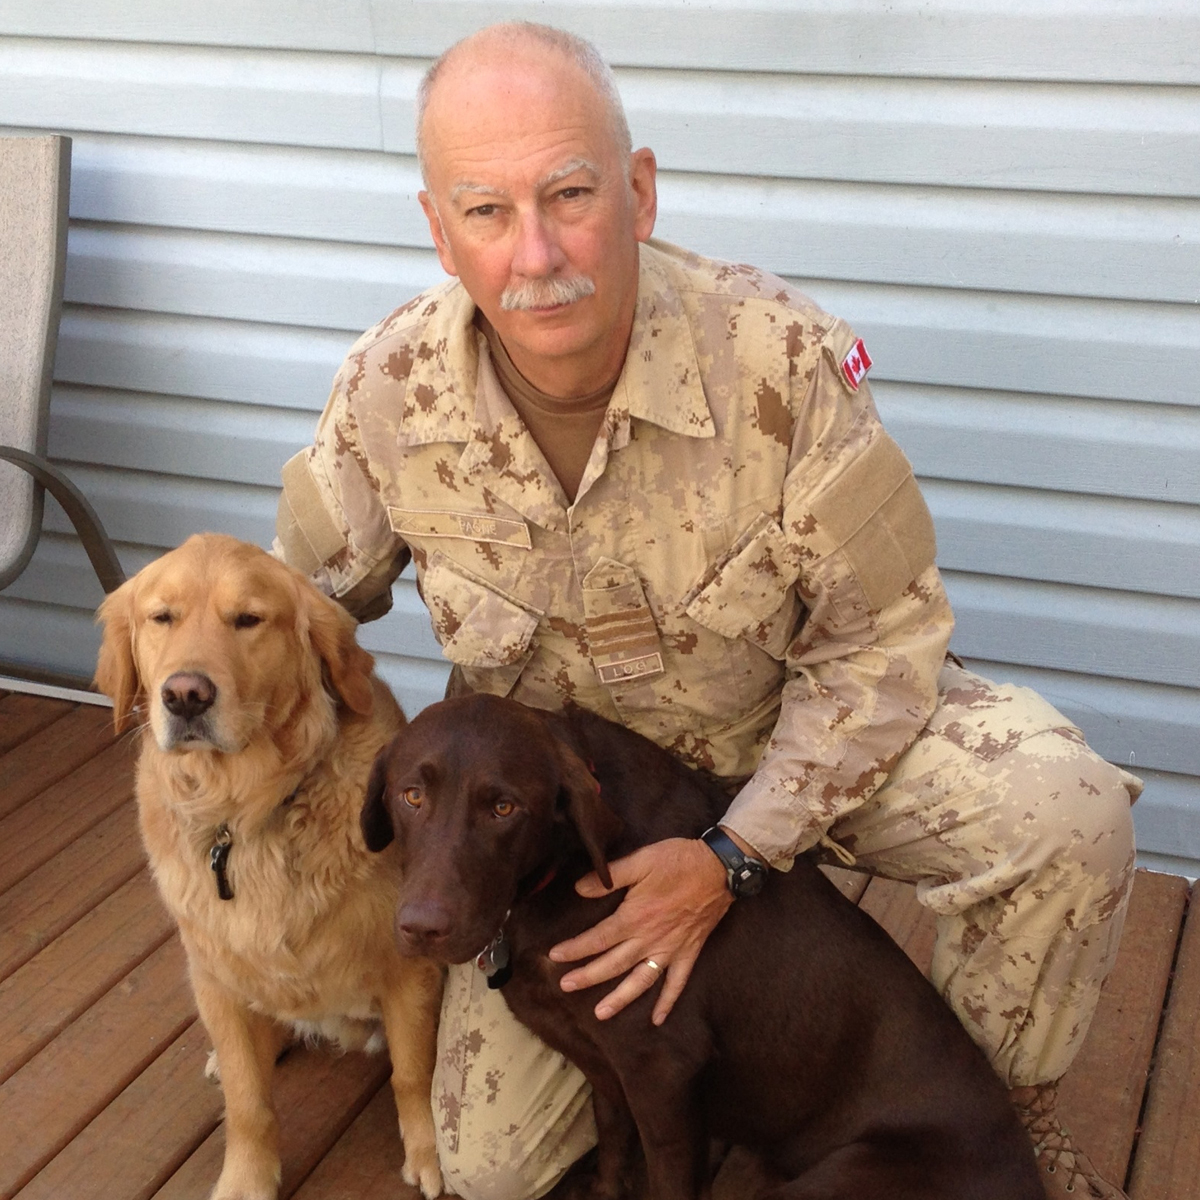 Lieutenant-Colonel (ret'd) Paul Paone is an organizer of this year’s upcoming commemorative ceremony in Victoria for the Afghanistan War. Paone is pictured in this file photo with his dogs Rayme and Brewster at his home in Victoria before leaving for his deployment to Afghanistan in 2013. Photo: Paul Paone.
